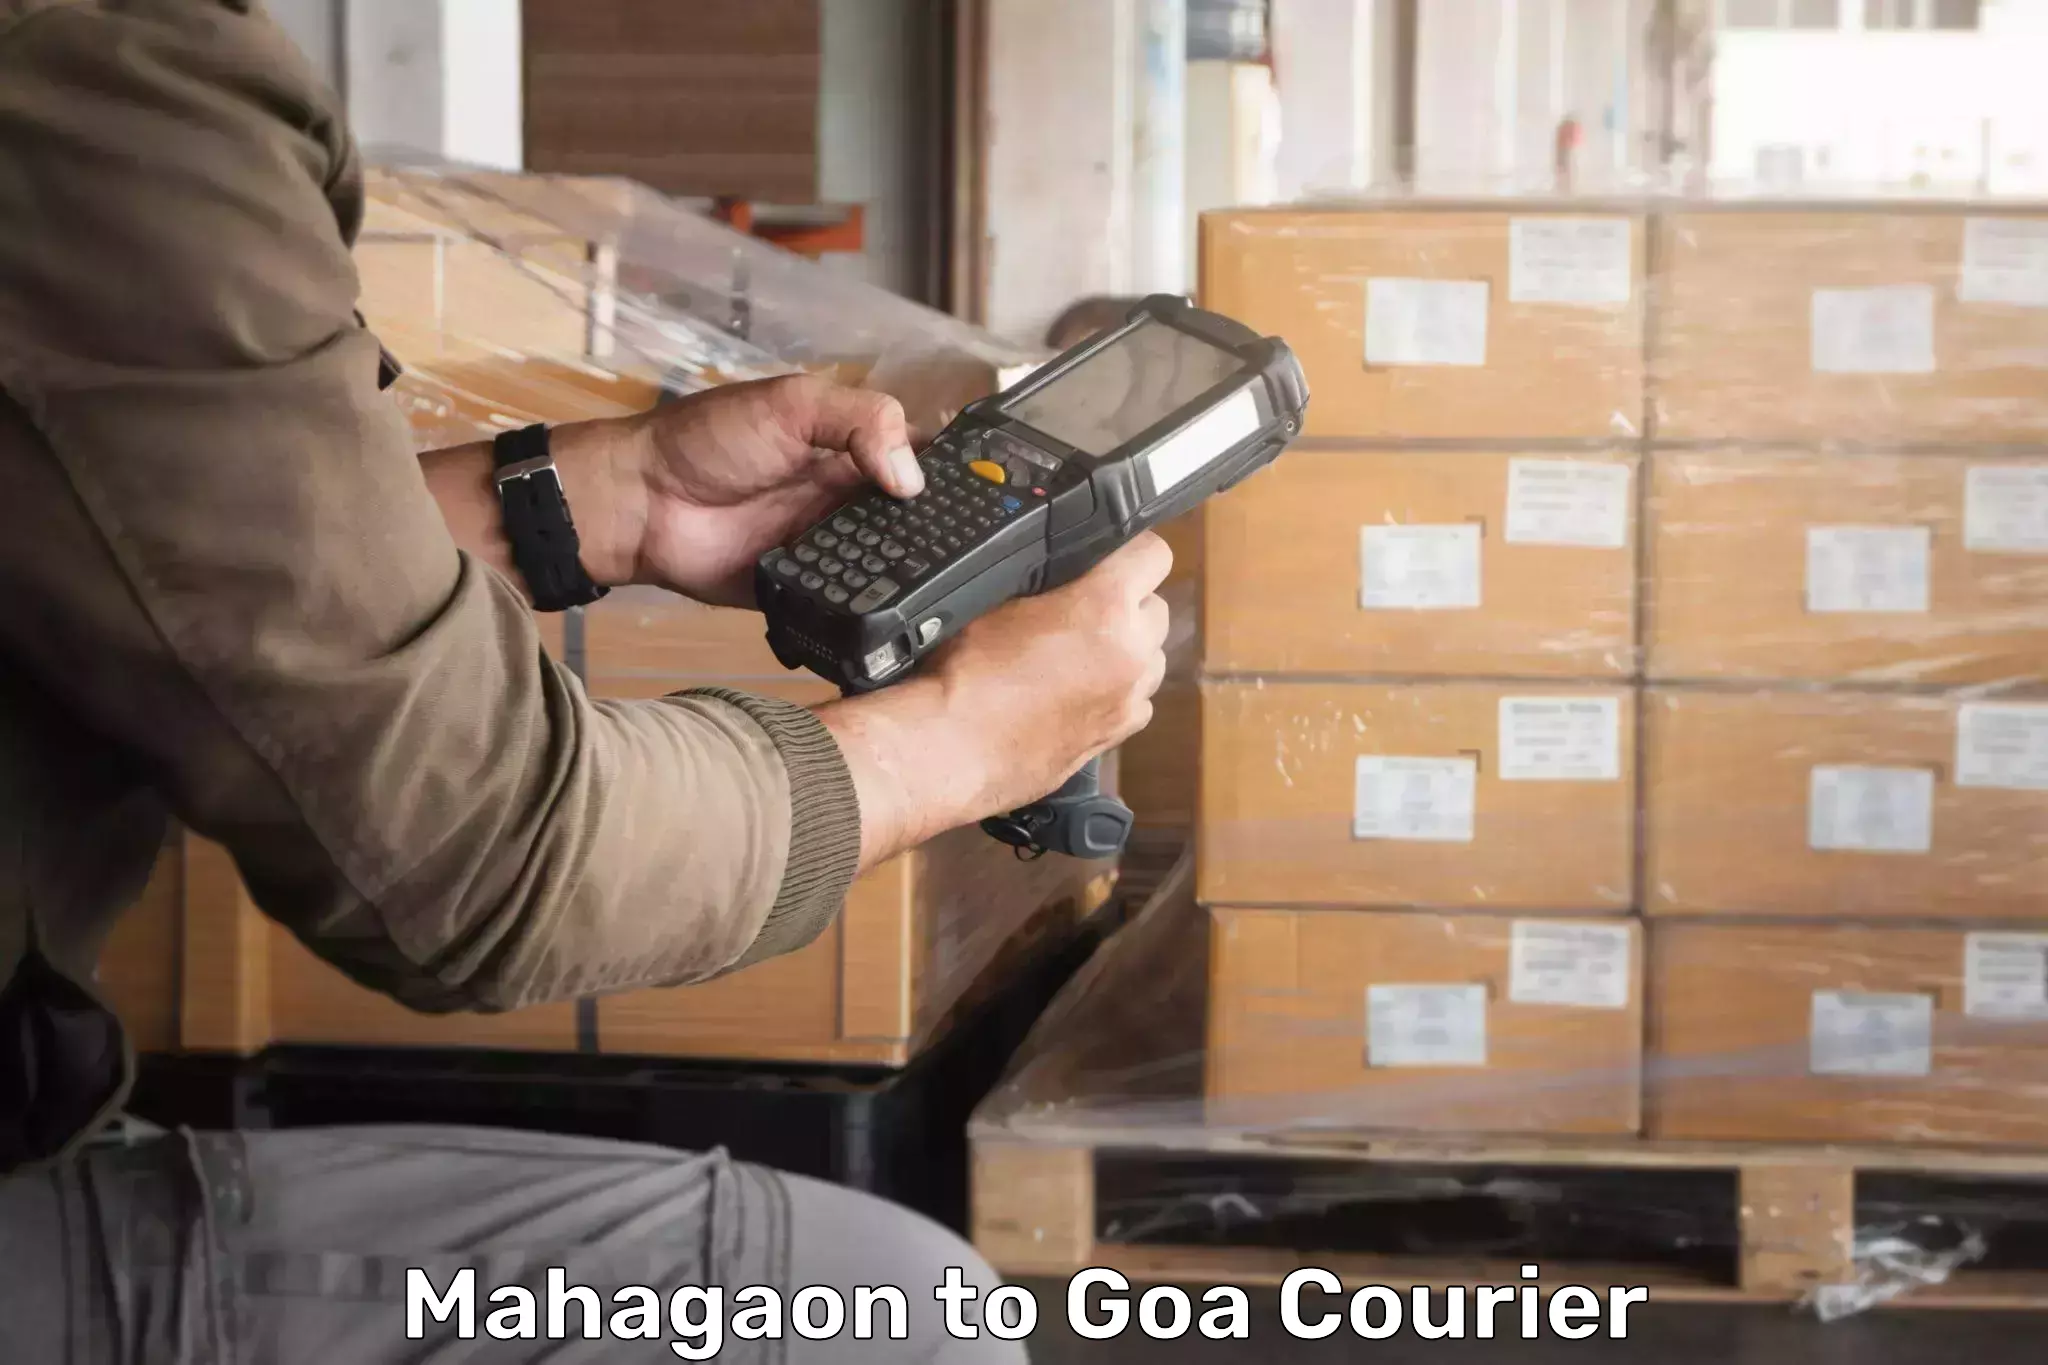 User-friendly delivery service Mahagaon to Goa